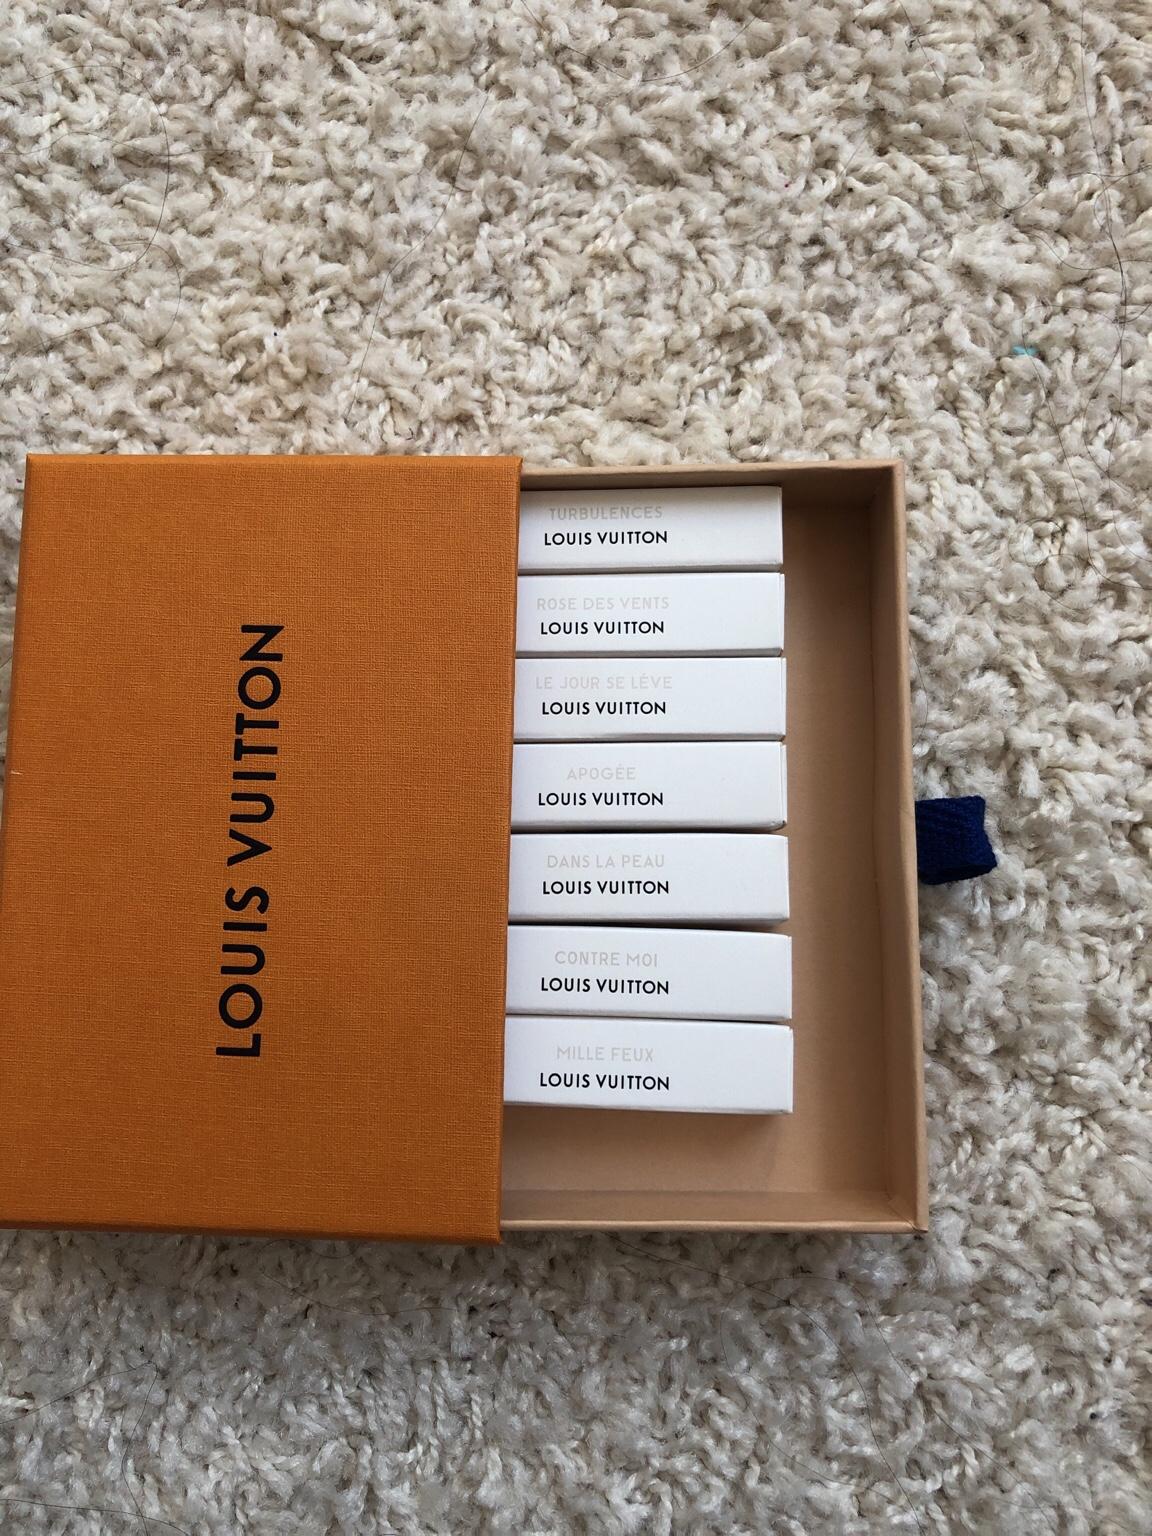 Louis Vuitton perfume samples, new unopened. in W13 Ealing for £45.00 for sale | Shpock